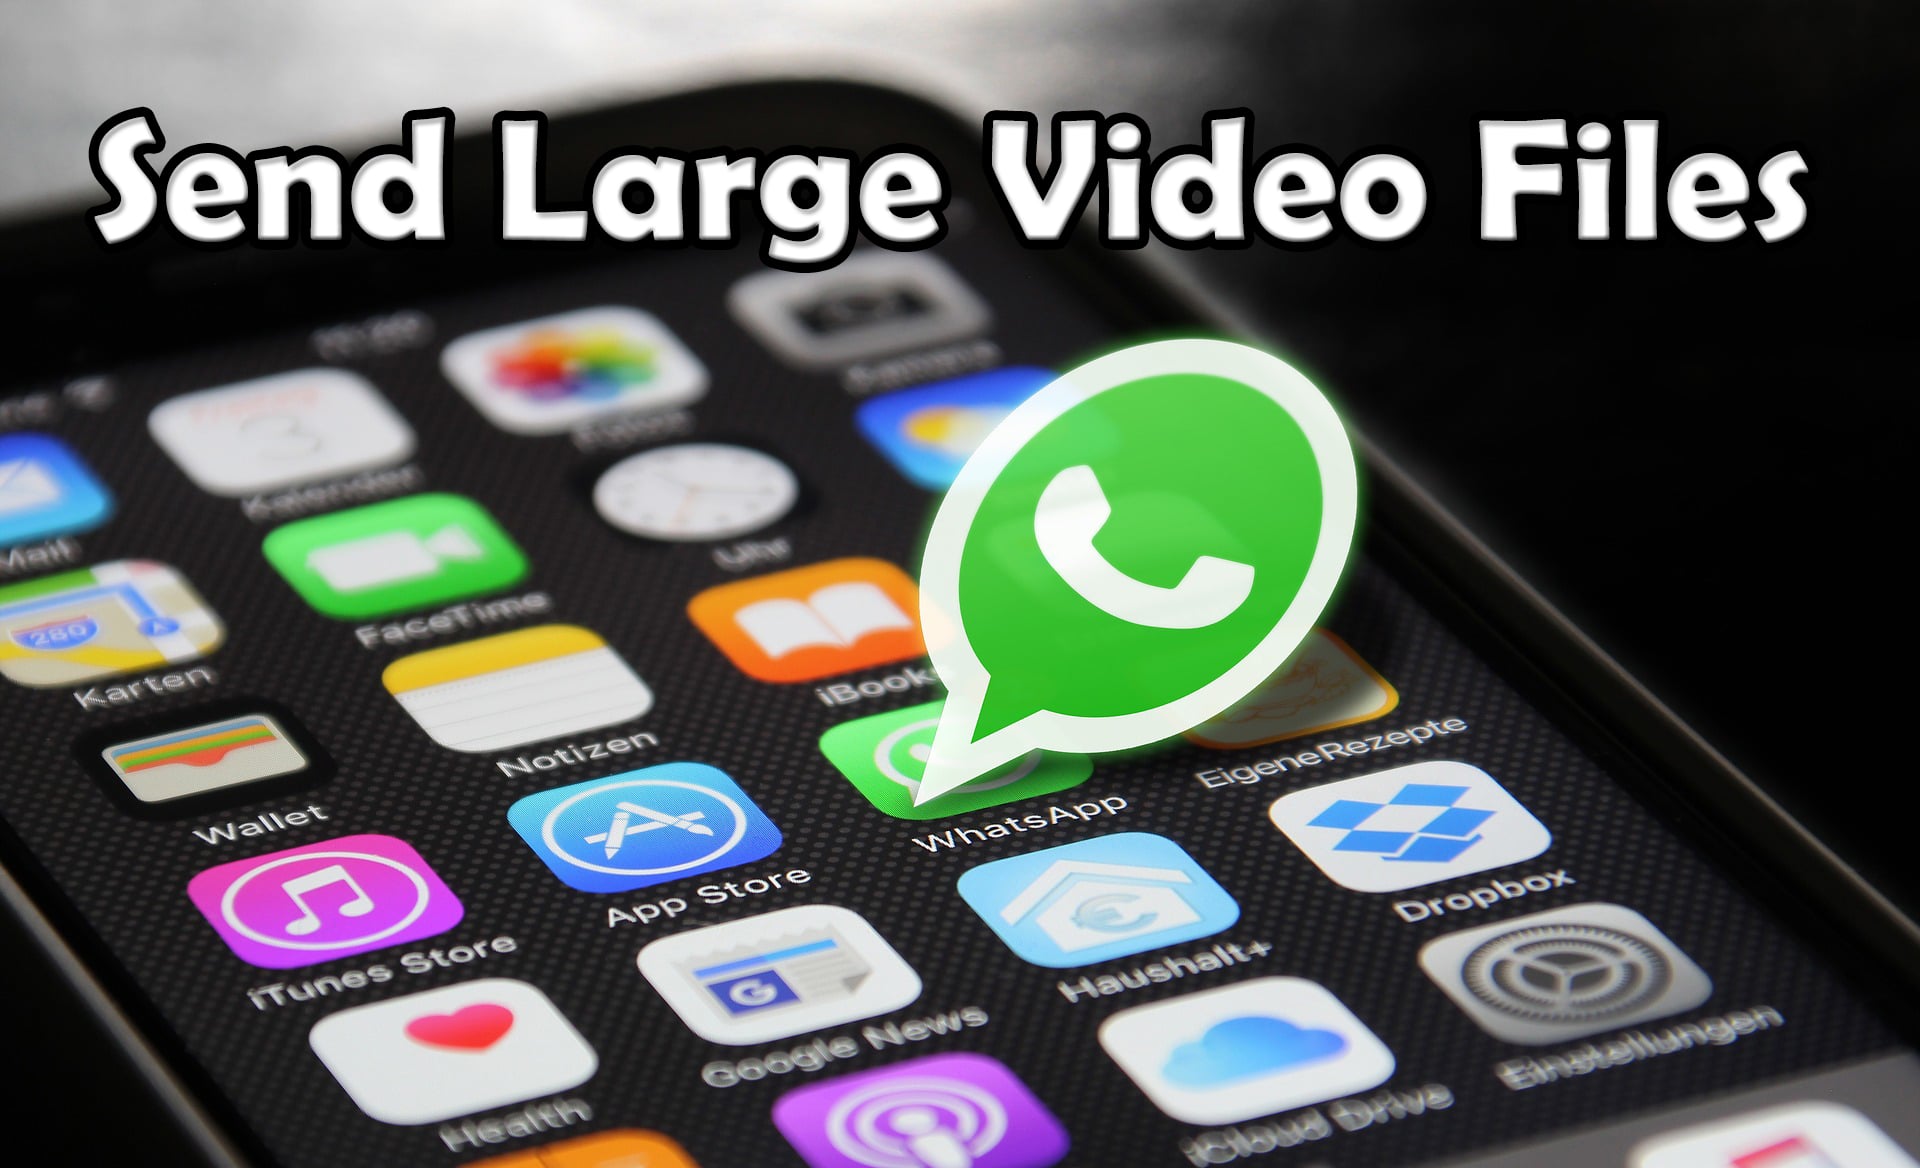 How to send more than 16mb video on whatsapp in jio phone